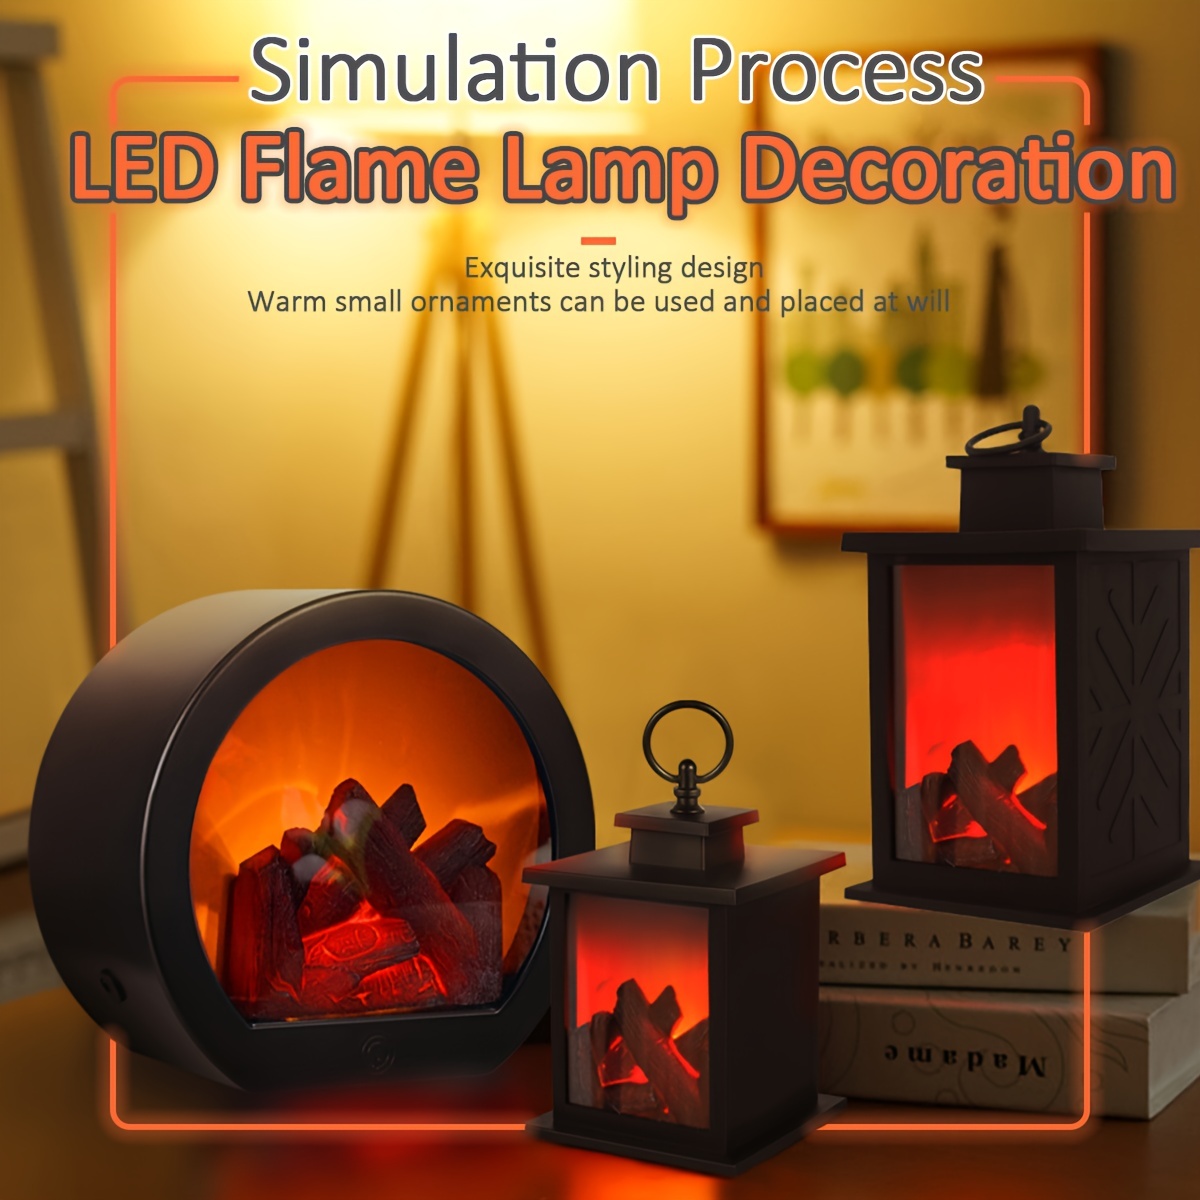 Lampe LED diffuseur simulation flamme • Moment Cocooning